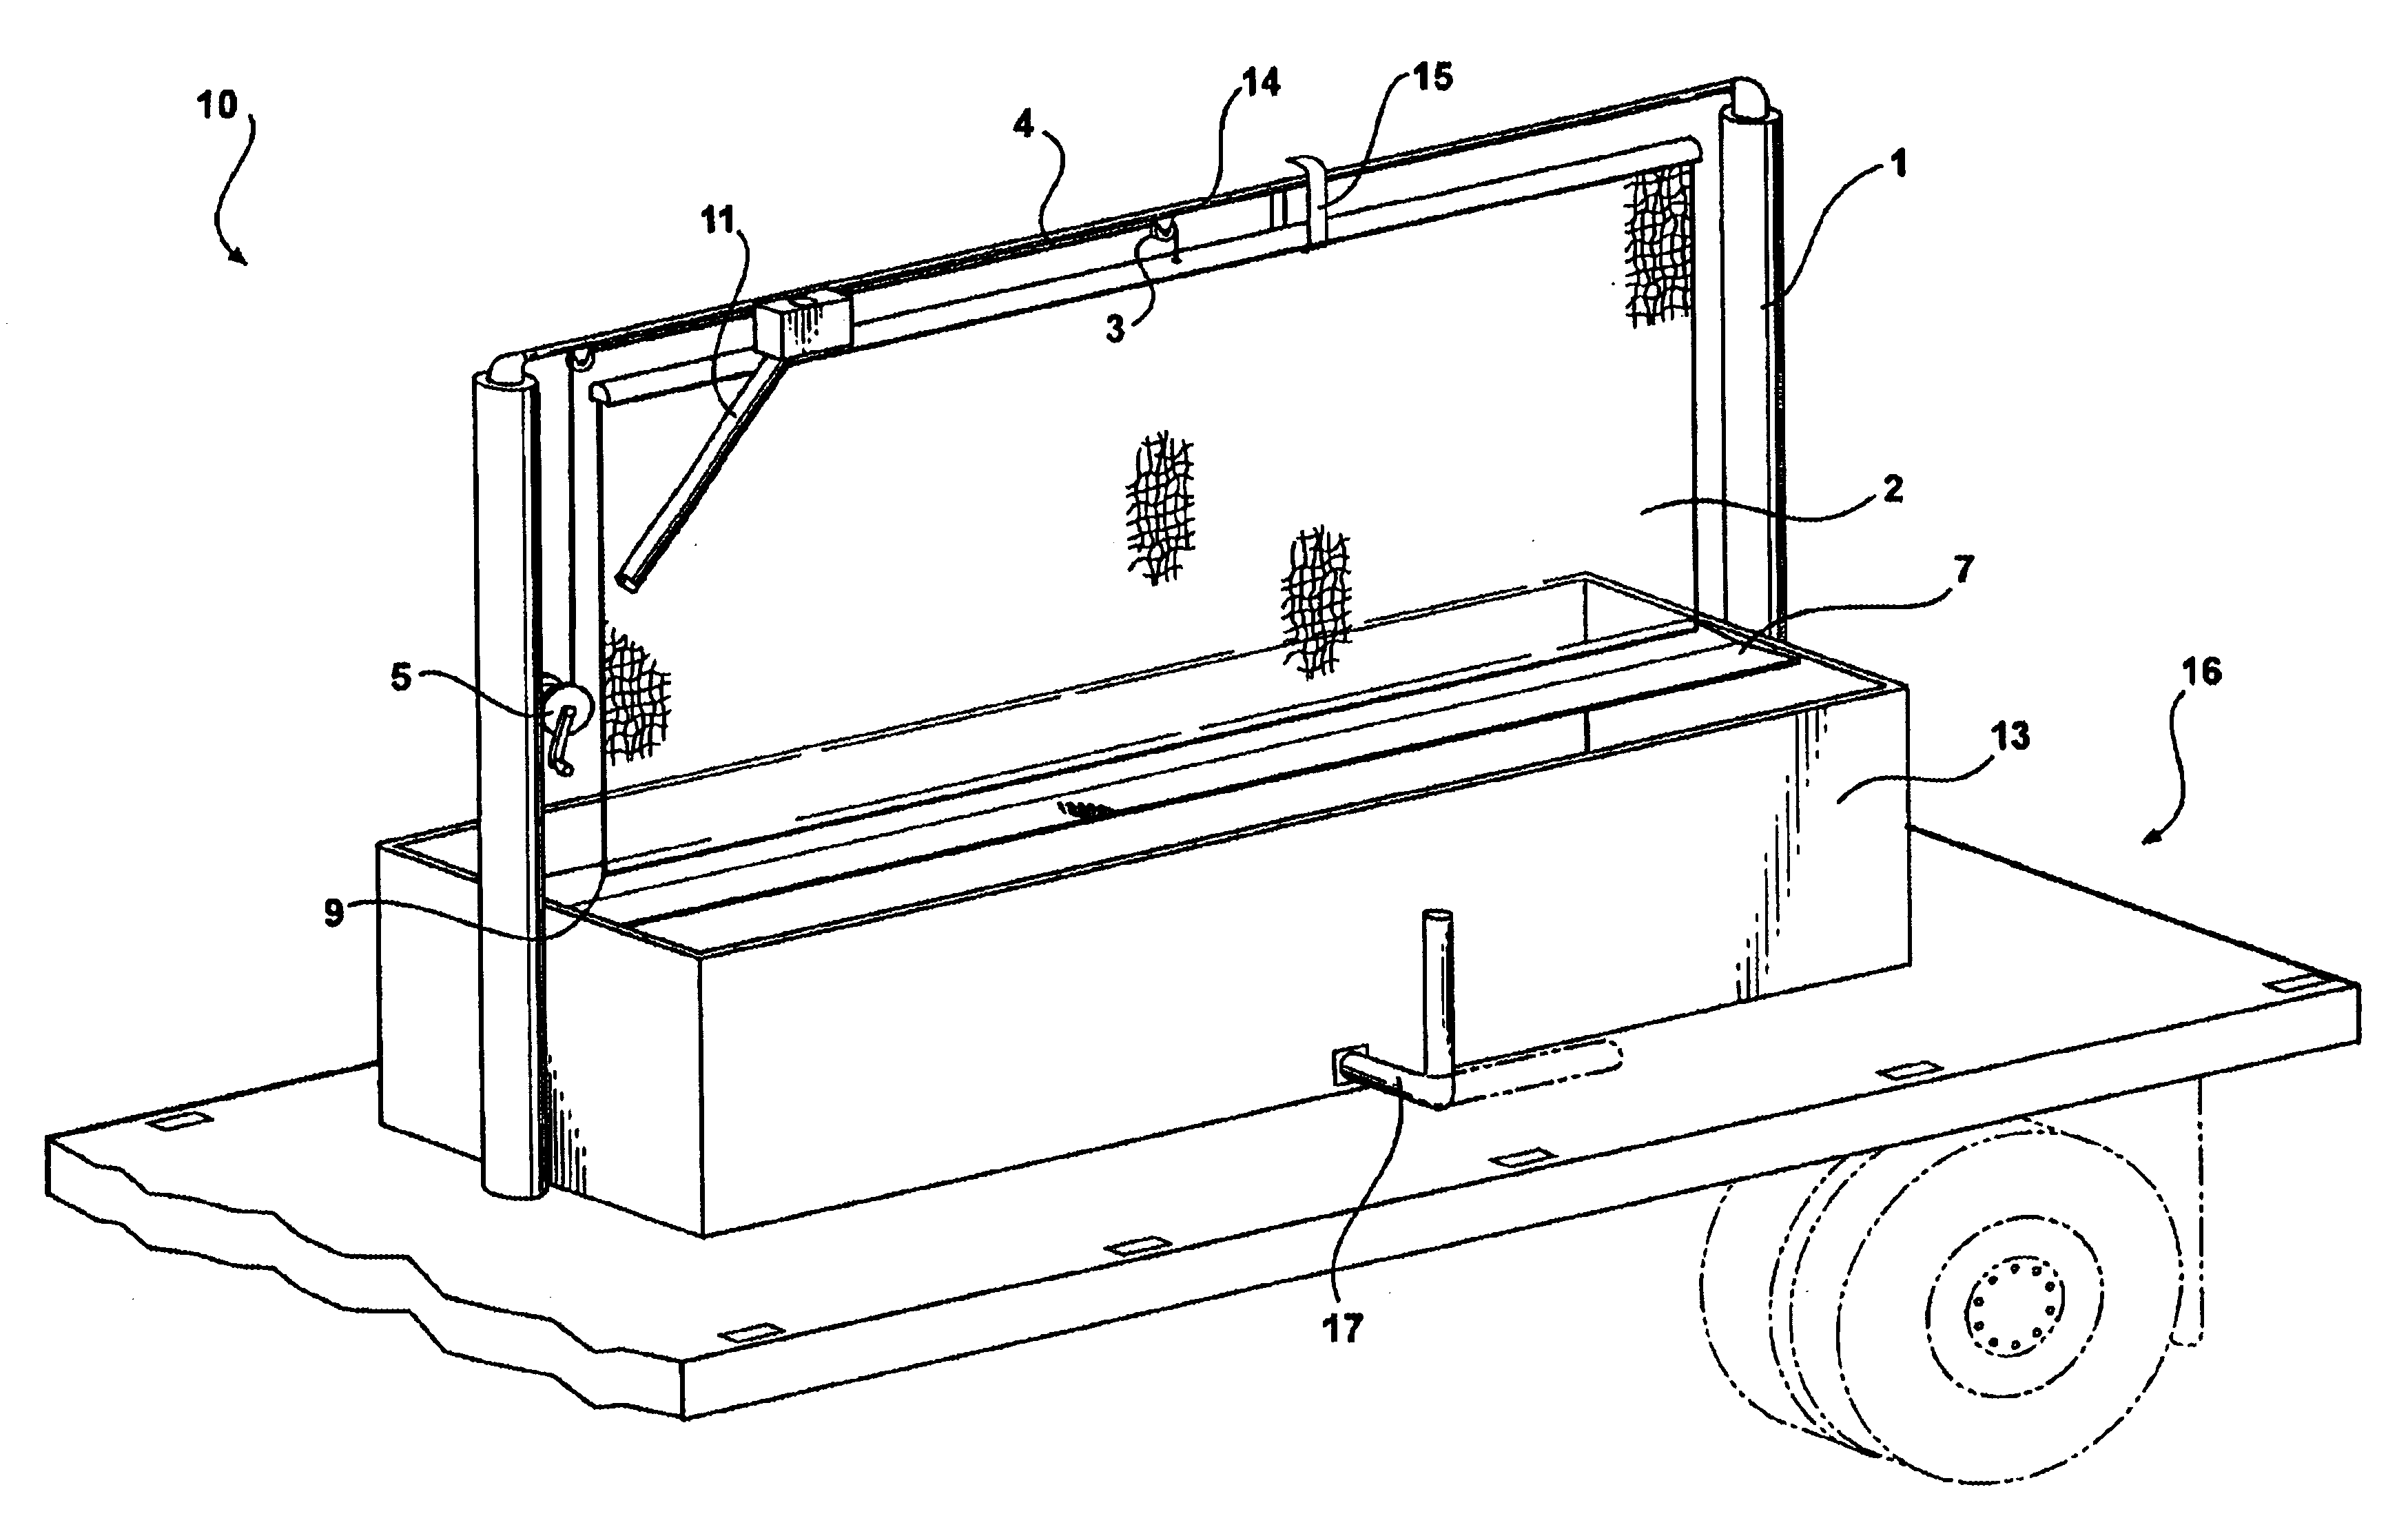 Atmospheric water absorption and retrieval device